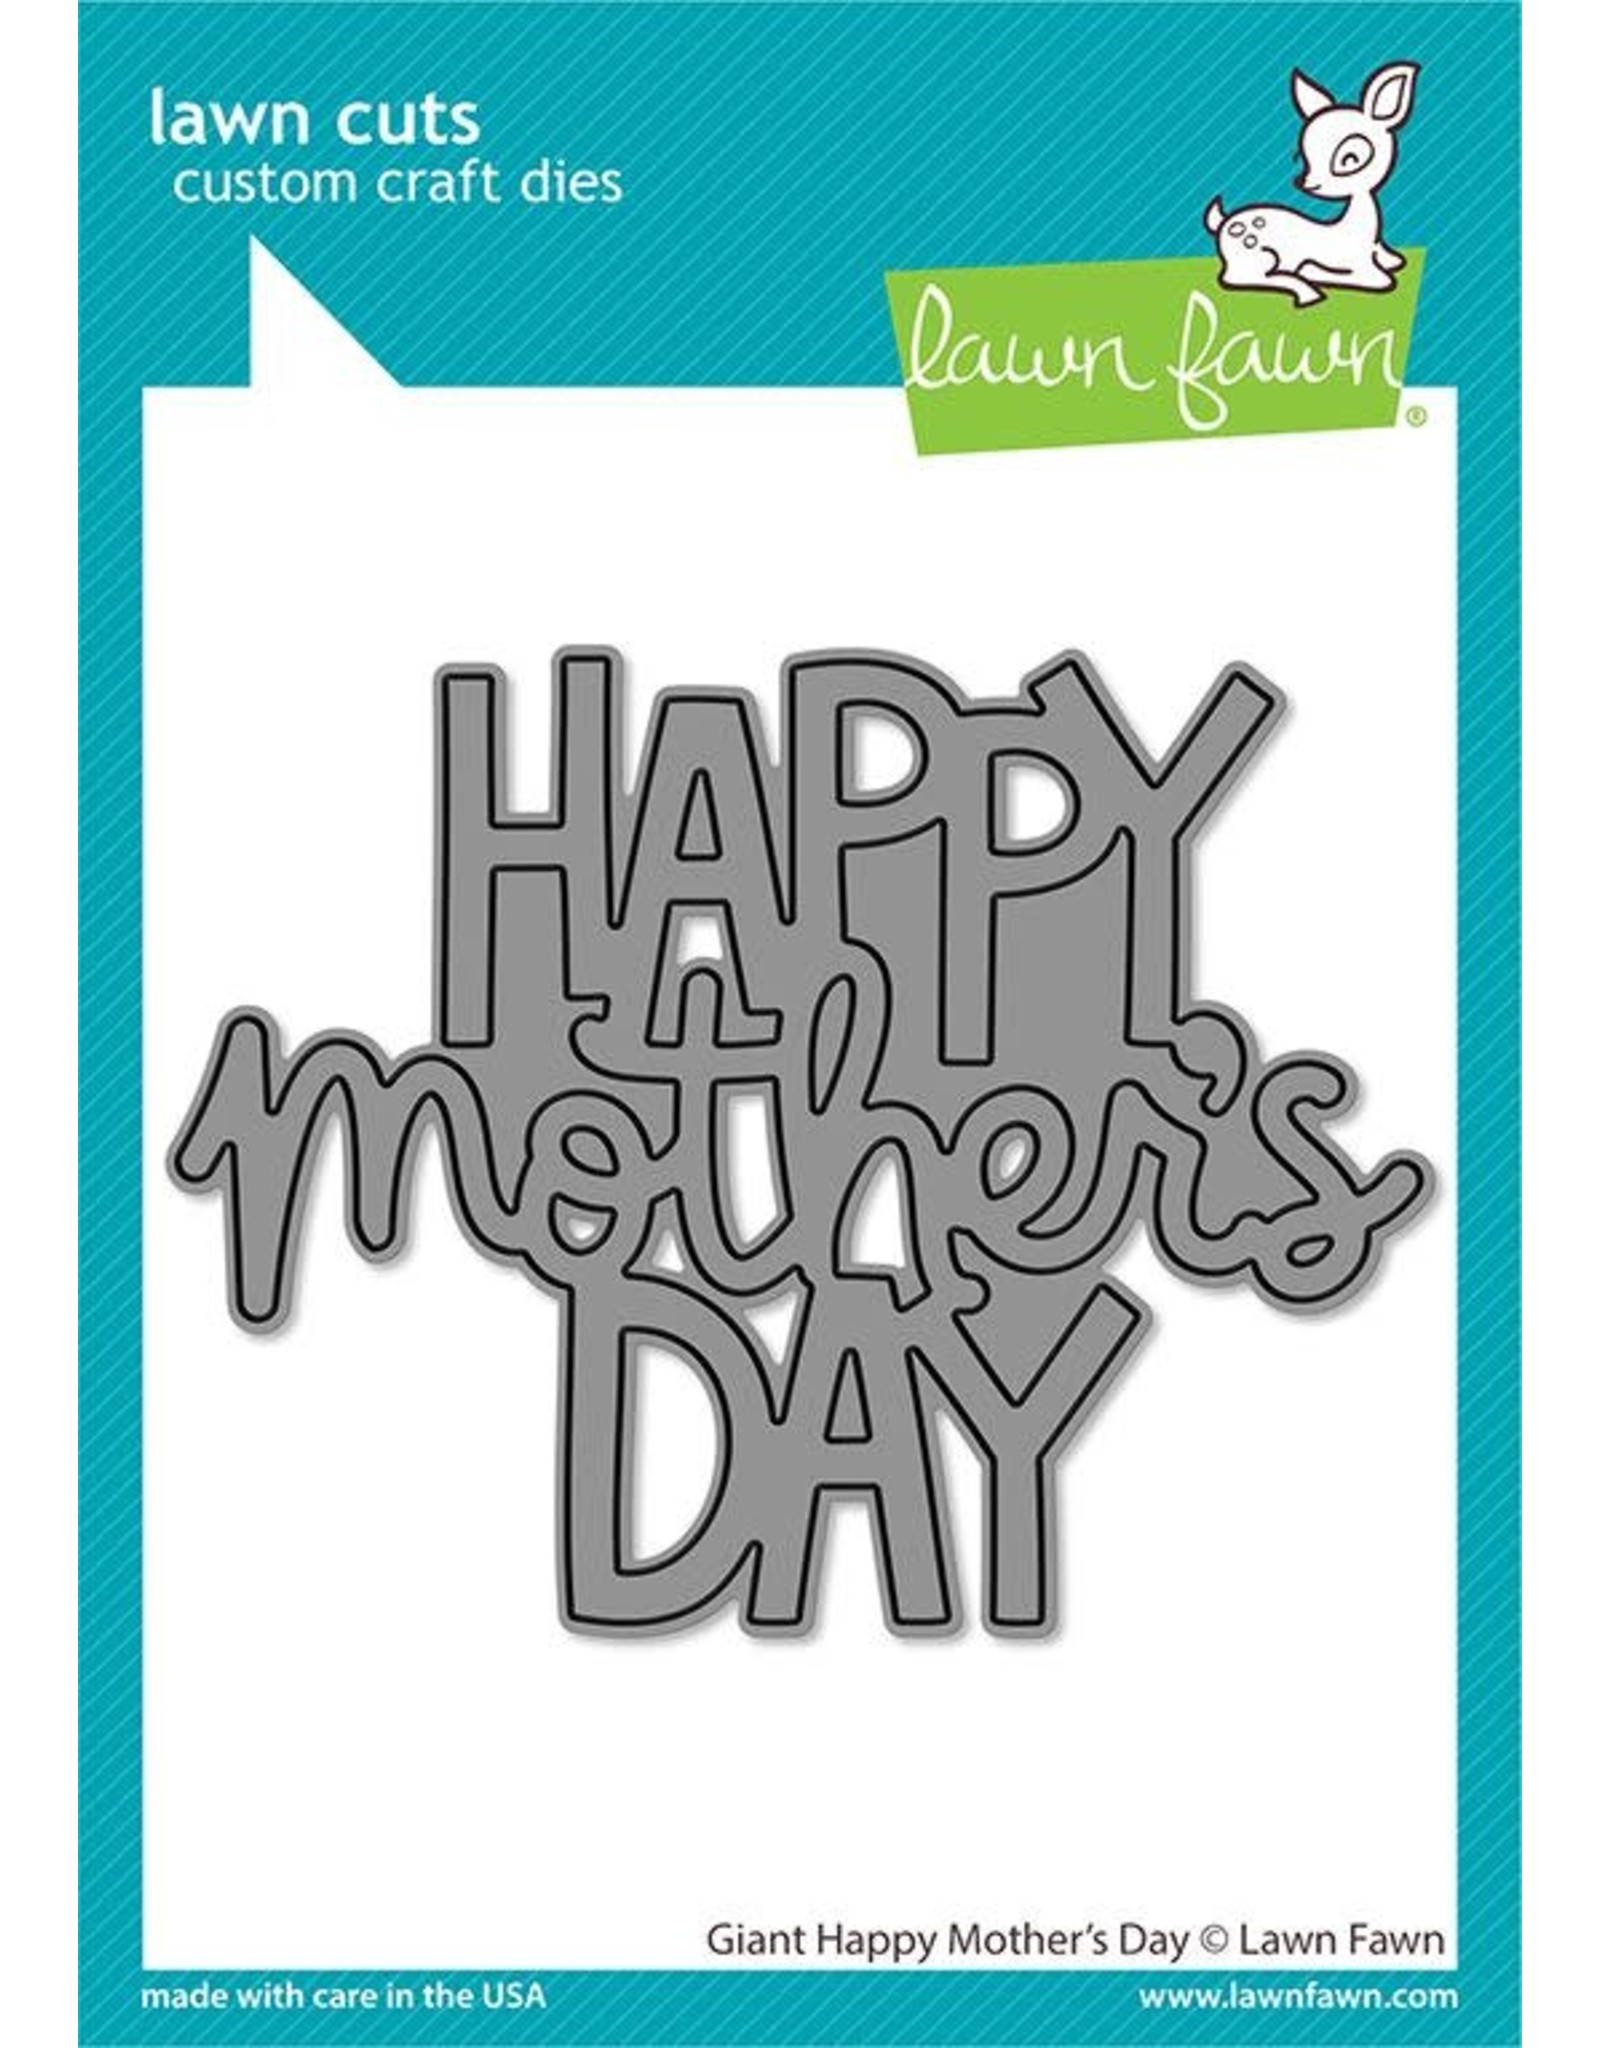 Lawn Fawn Giant Happy Mother's Day Die - Lawn Cuts